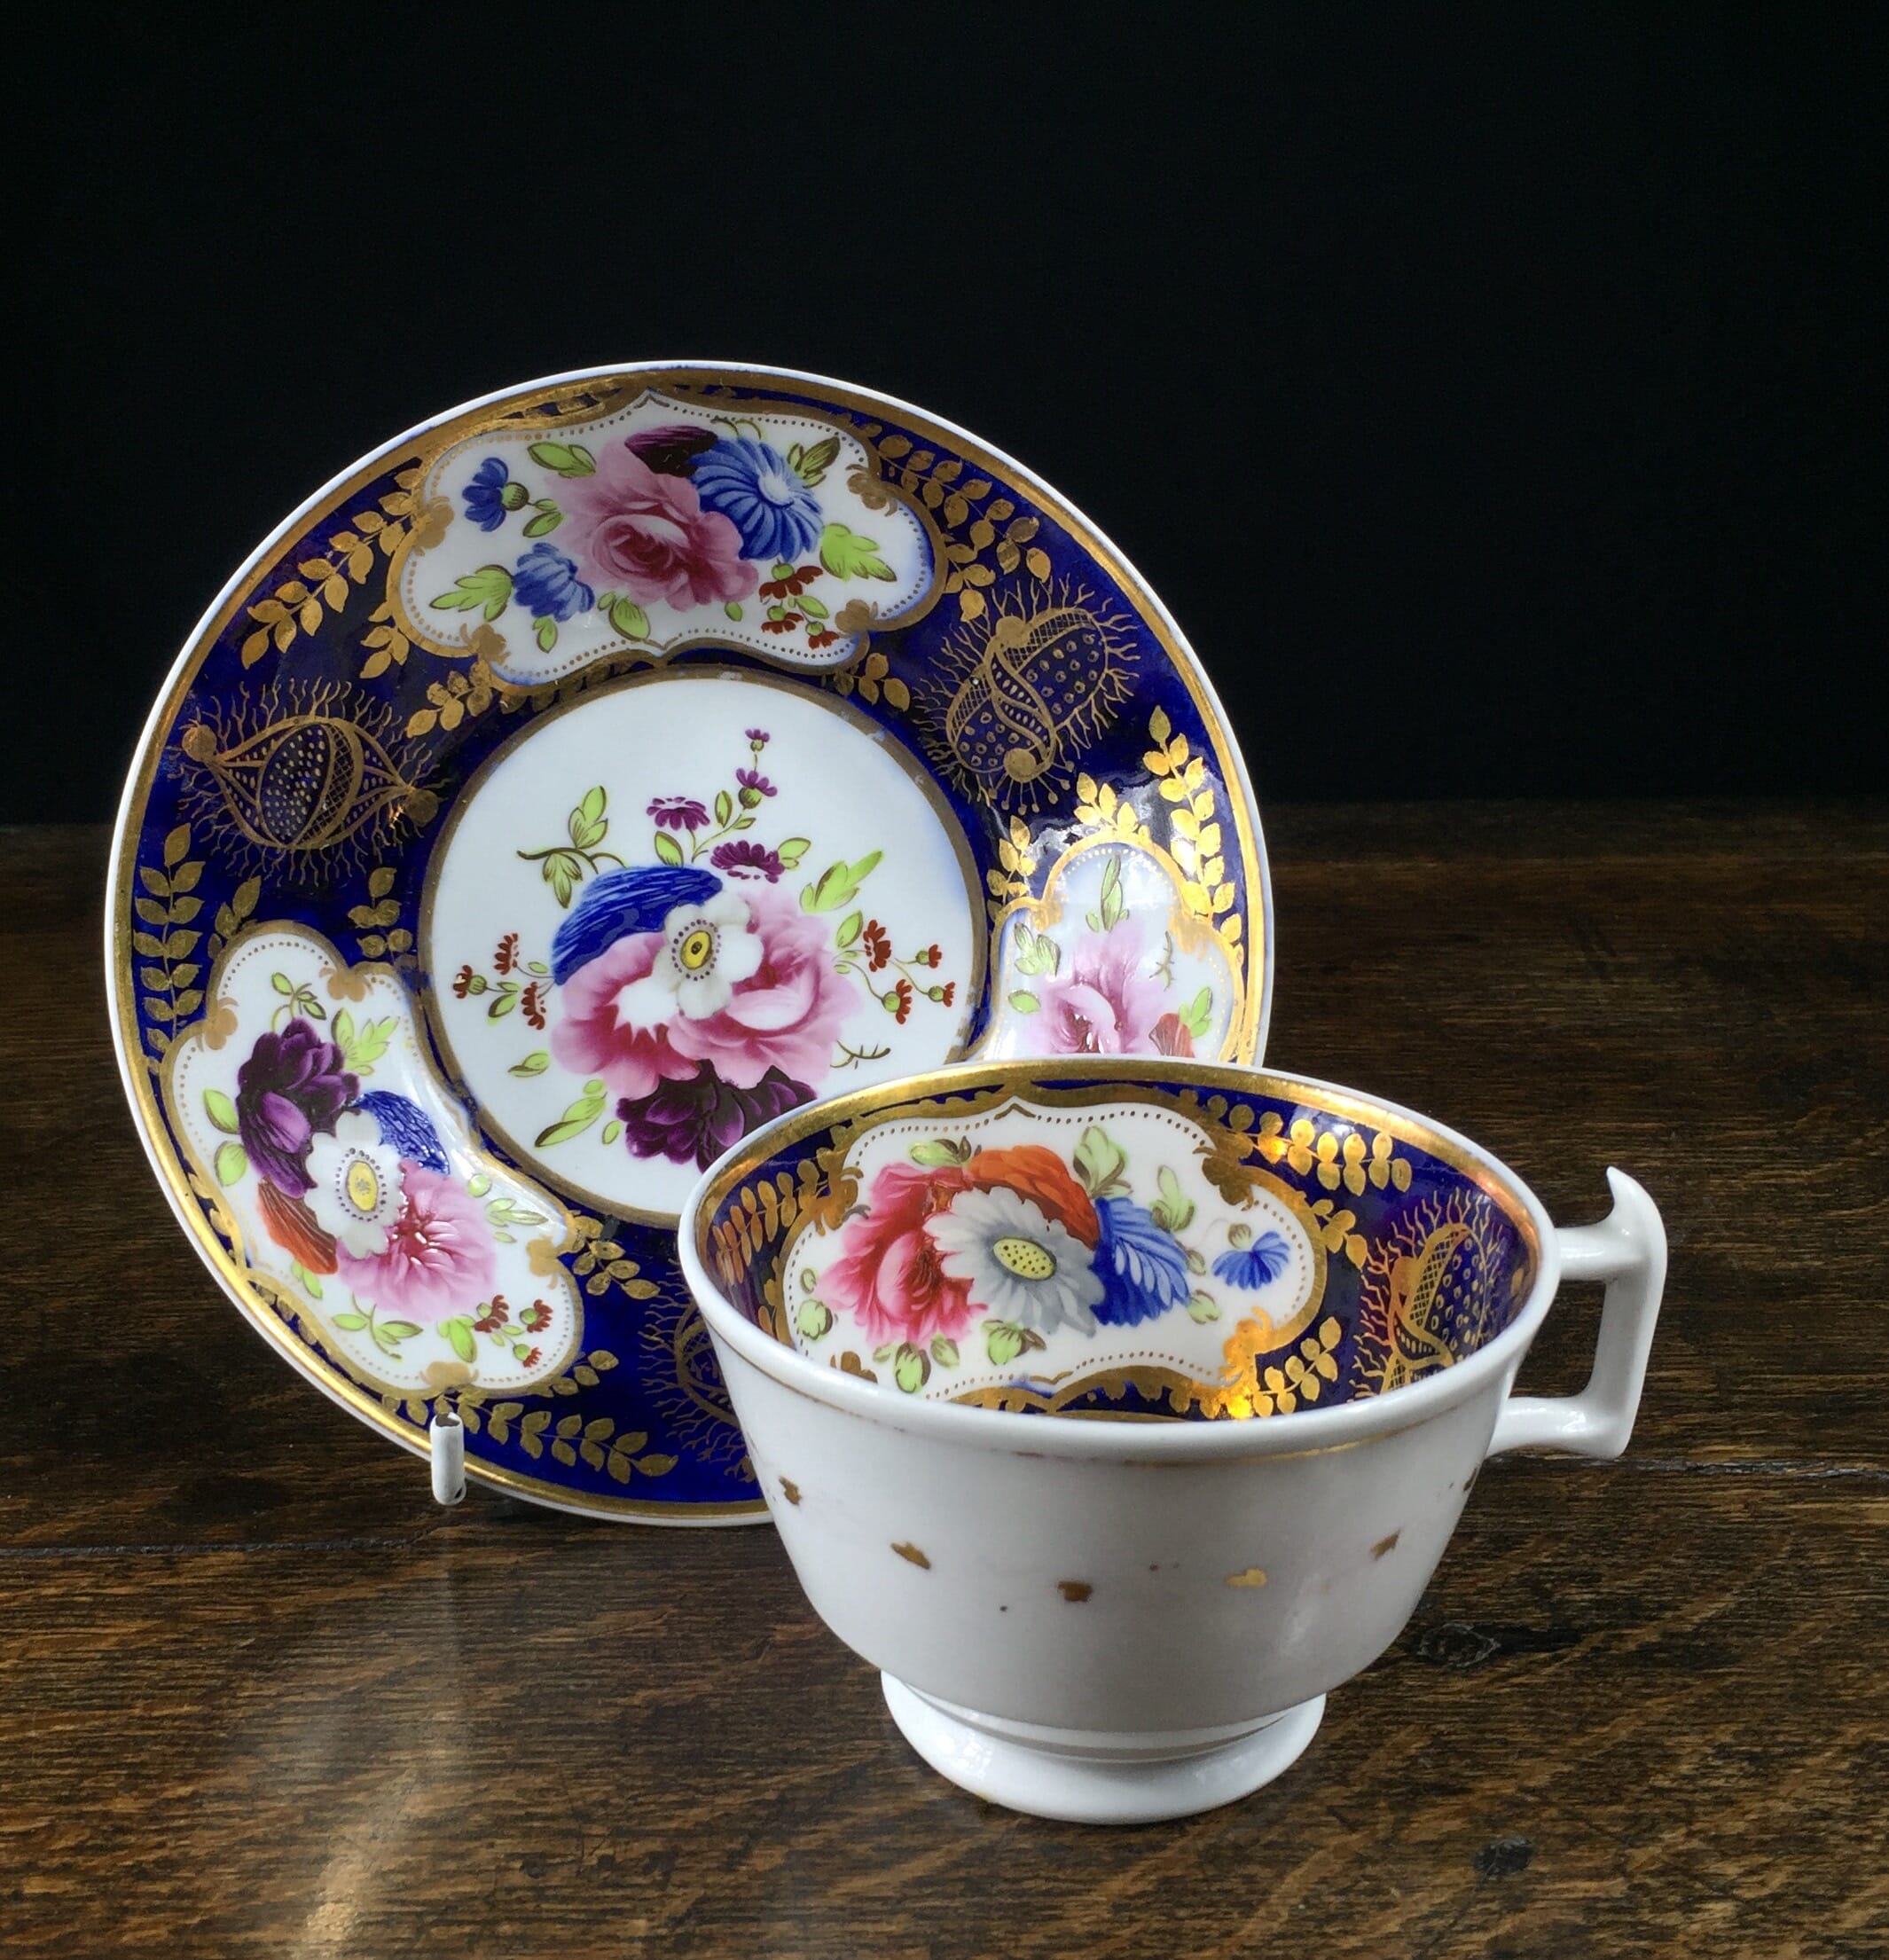 English bone china cup & saucer, probably Bourne, c. 1825-0